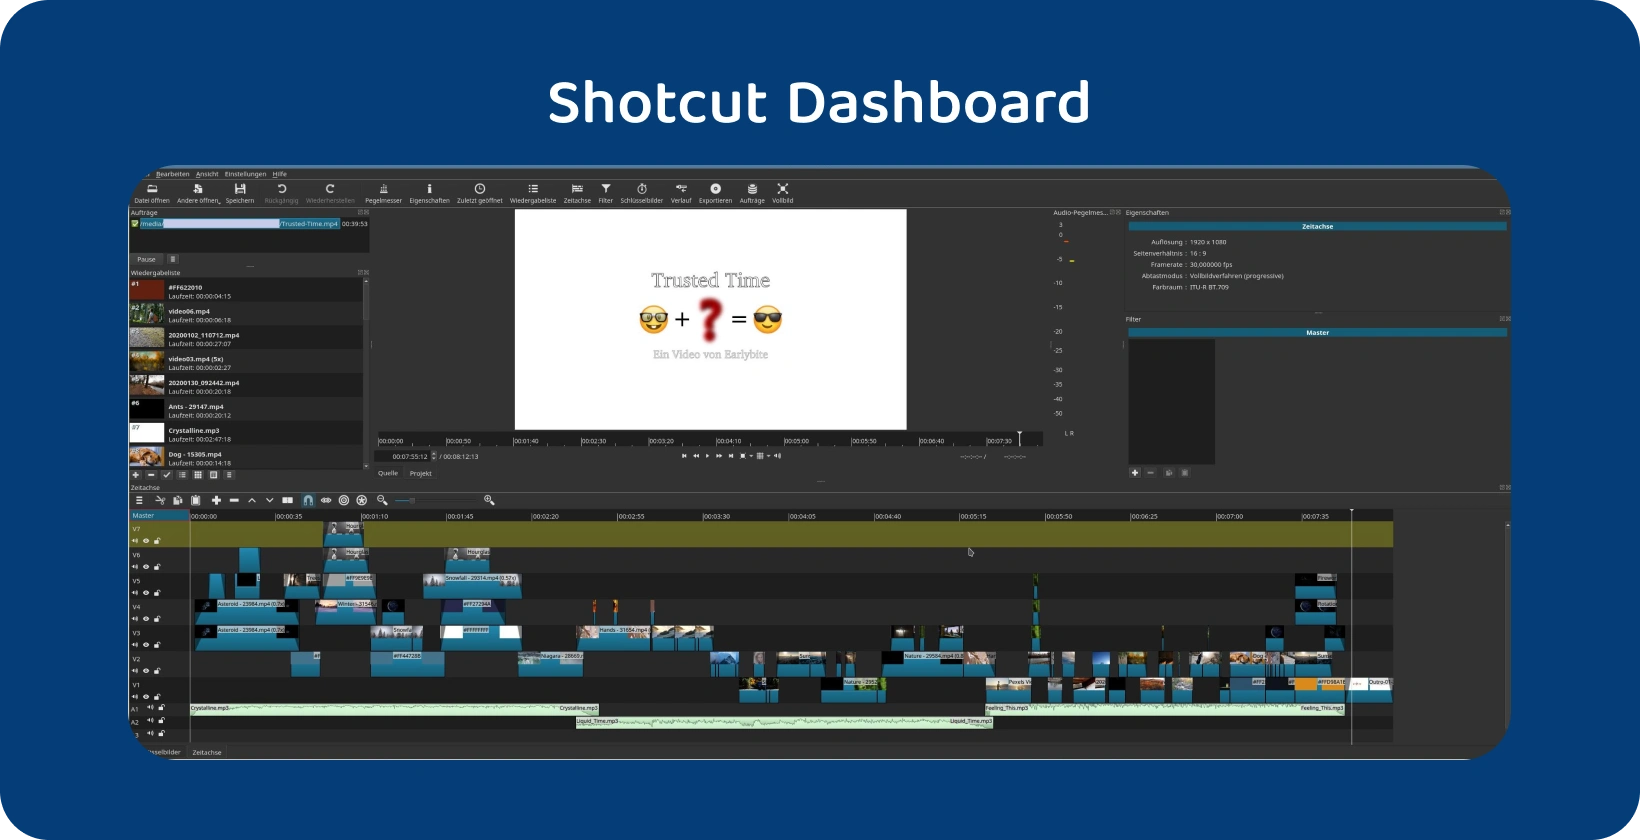 Video editing software Shotcut displaying a complex timeline with multiple tracks, indicating an advanced project.